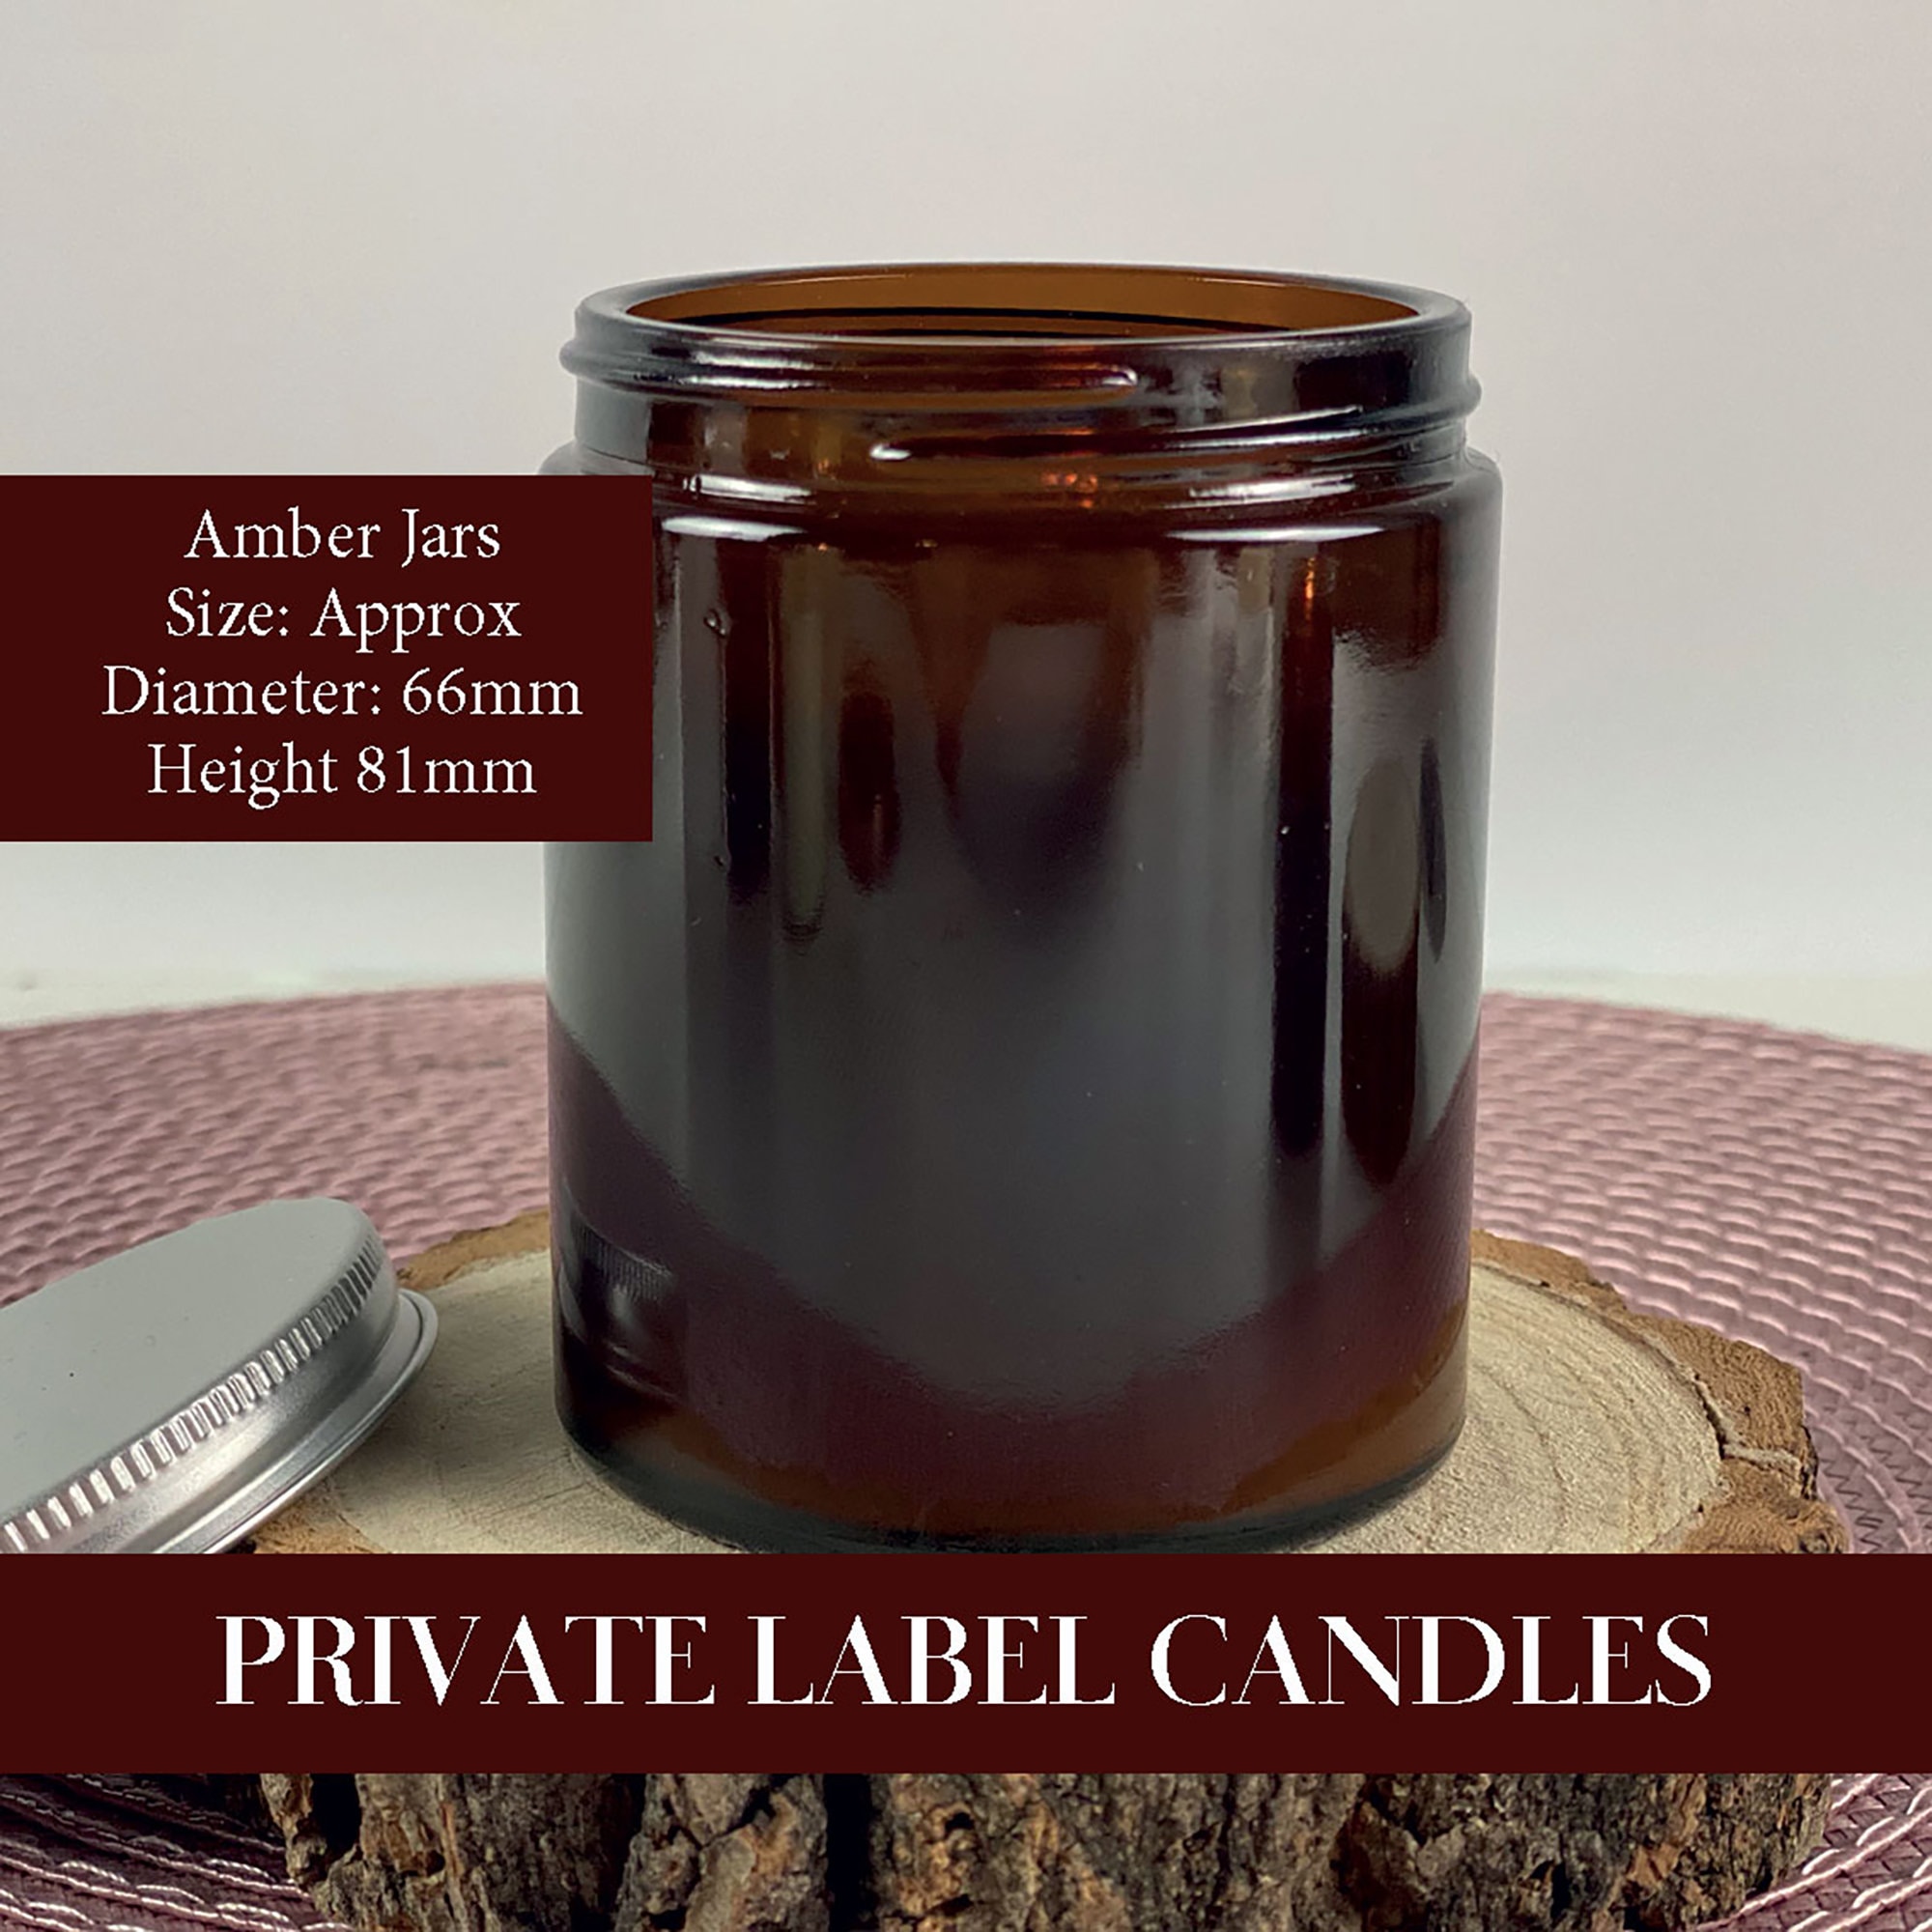 Bulk Candles 10 Piece for Cheap. Free Shipping. Personalized